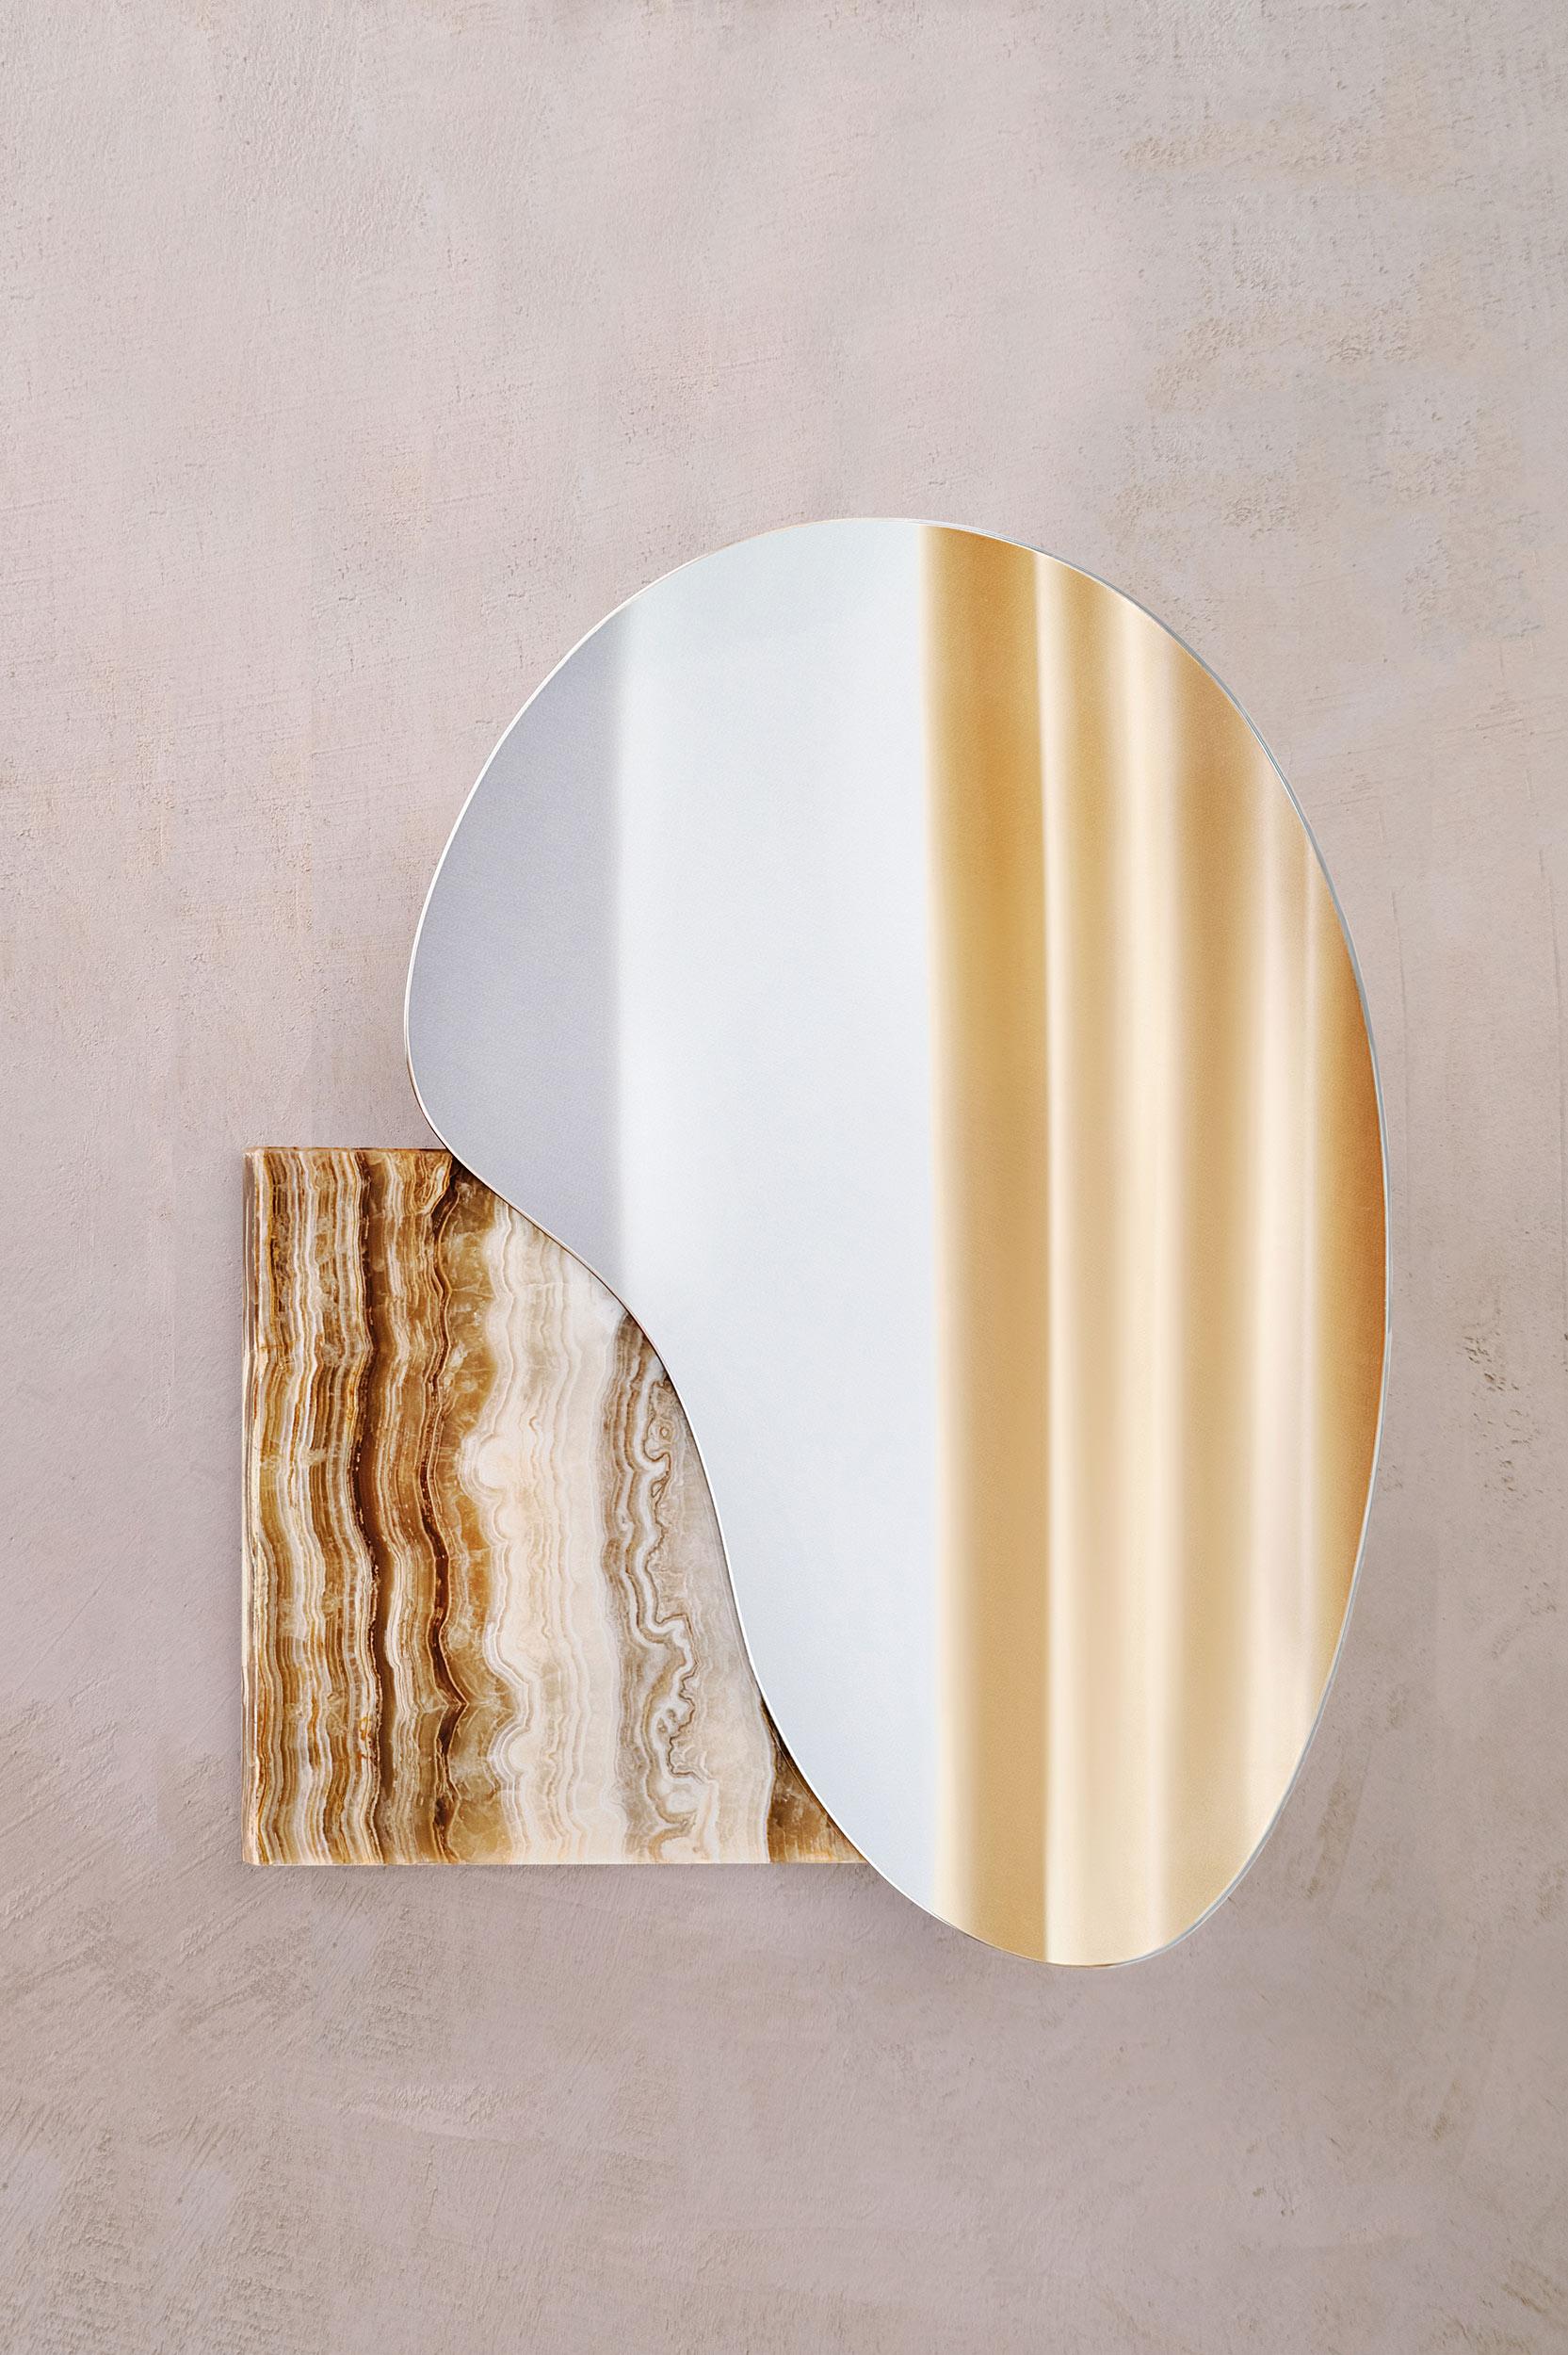 Painted Modern Wall Mirror Lake 4 by Noom with Black Marble Alanya Base